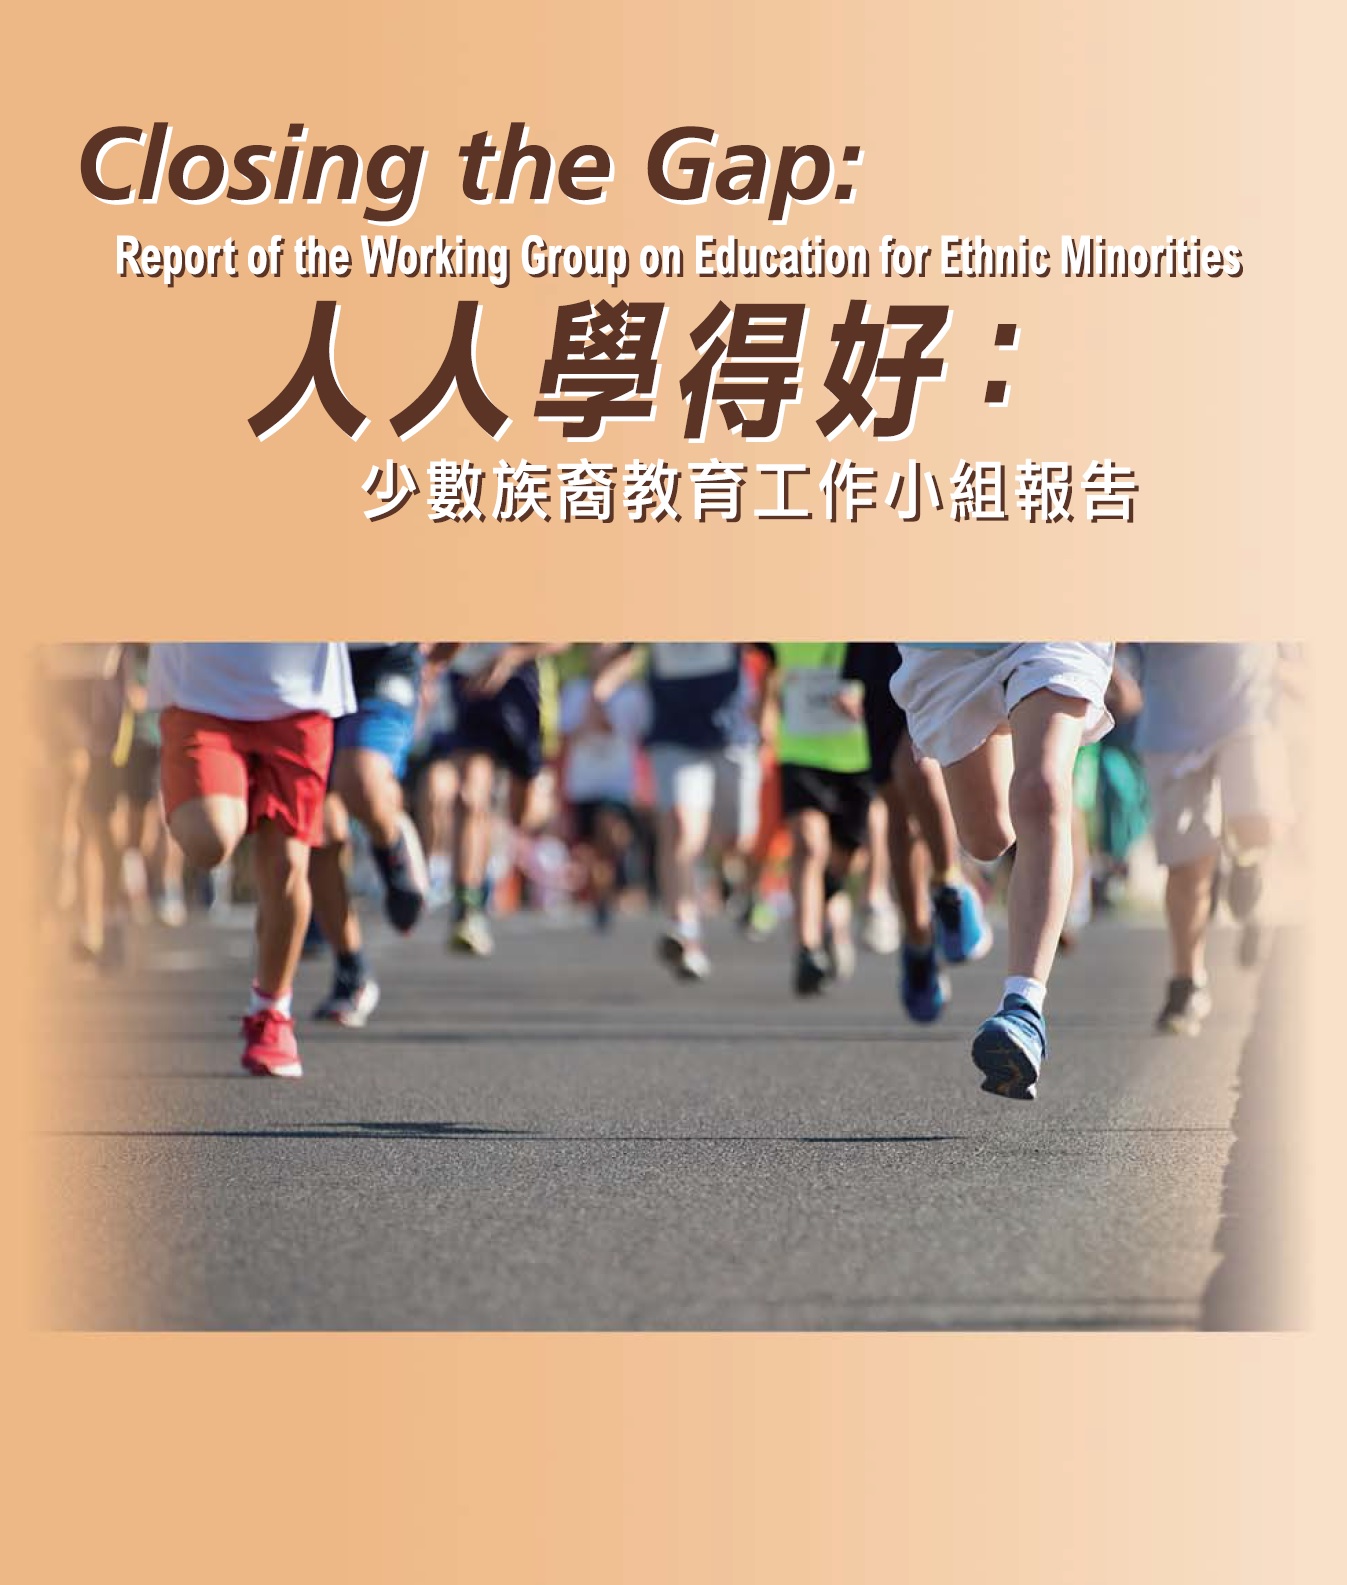 Cover of the report, featuring a photo of runners in a marathon, zooming in on their legs.